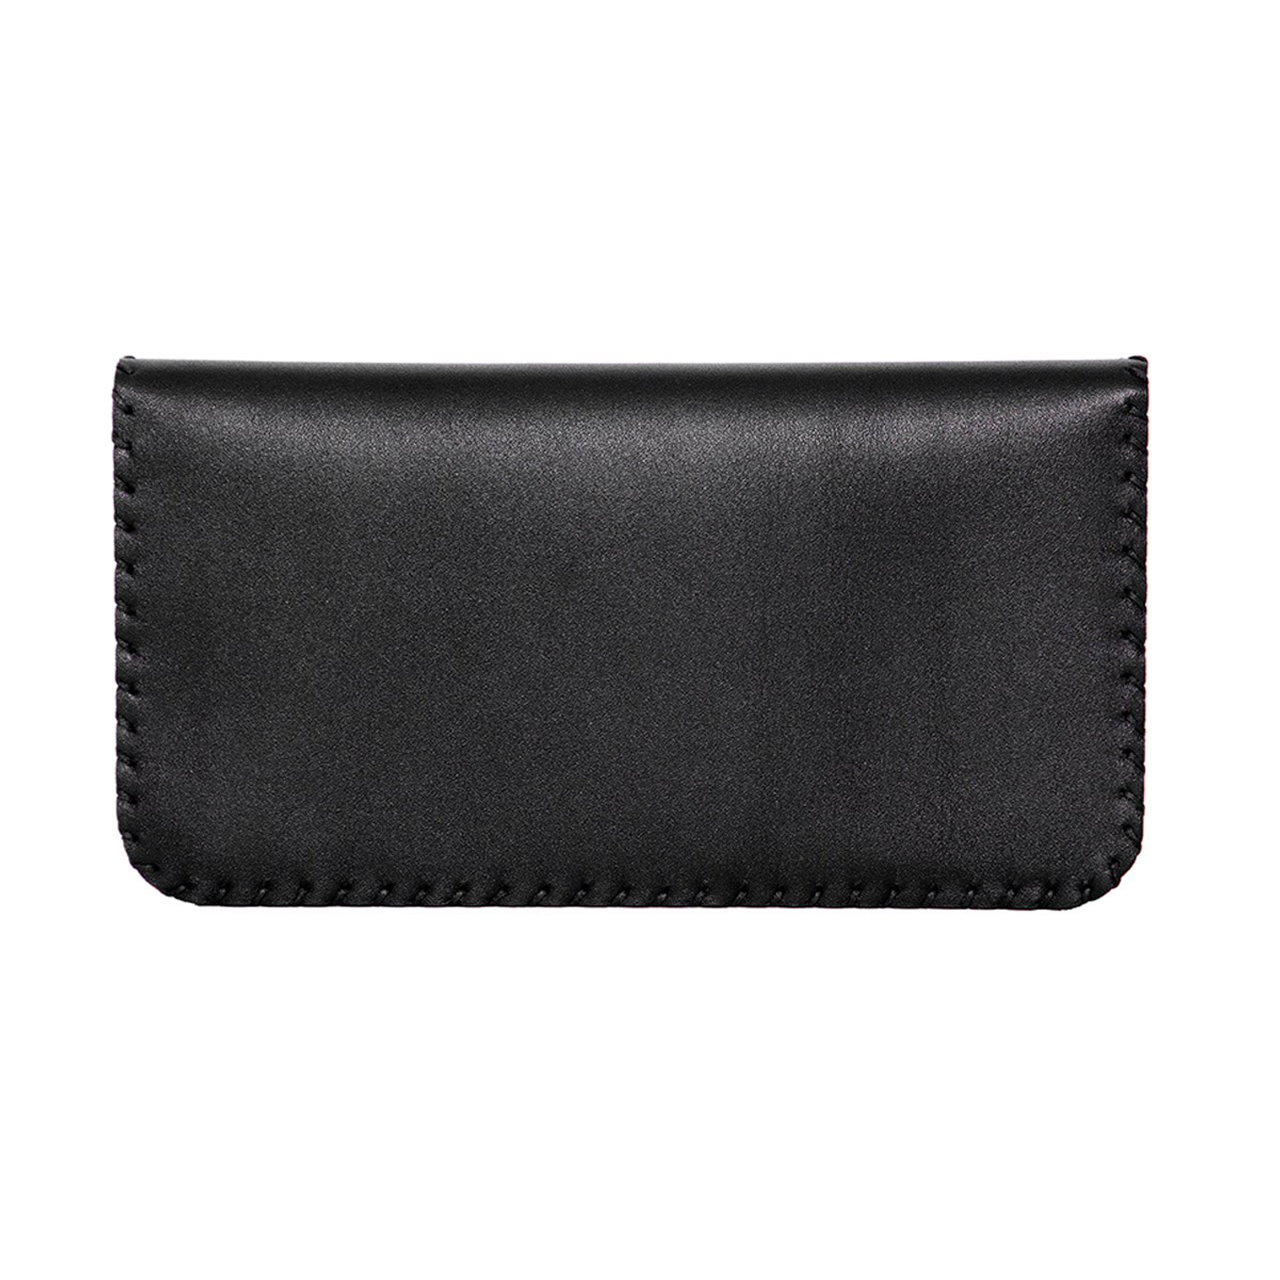 TIKISH NATURAL LEATHER WALLET, TW02 MODEL